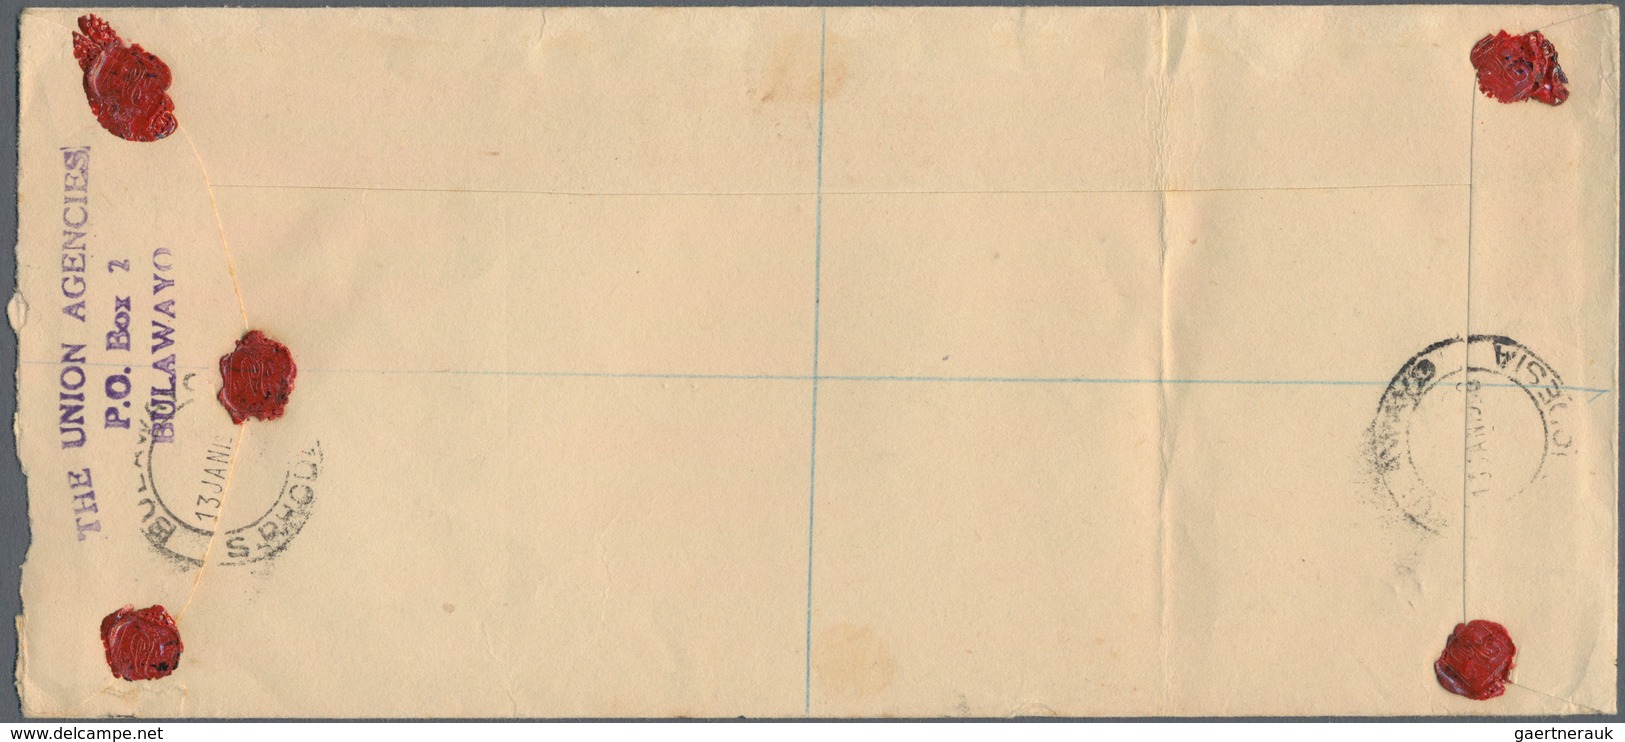 Süd-Rhodesien: 1948 (13.1.), Registered Cover Used From Bulawayo To Johannesburg With Metermark 2d. - Southern Rhodesia (...-1964)